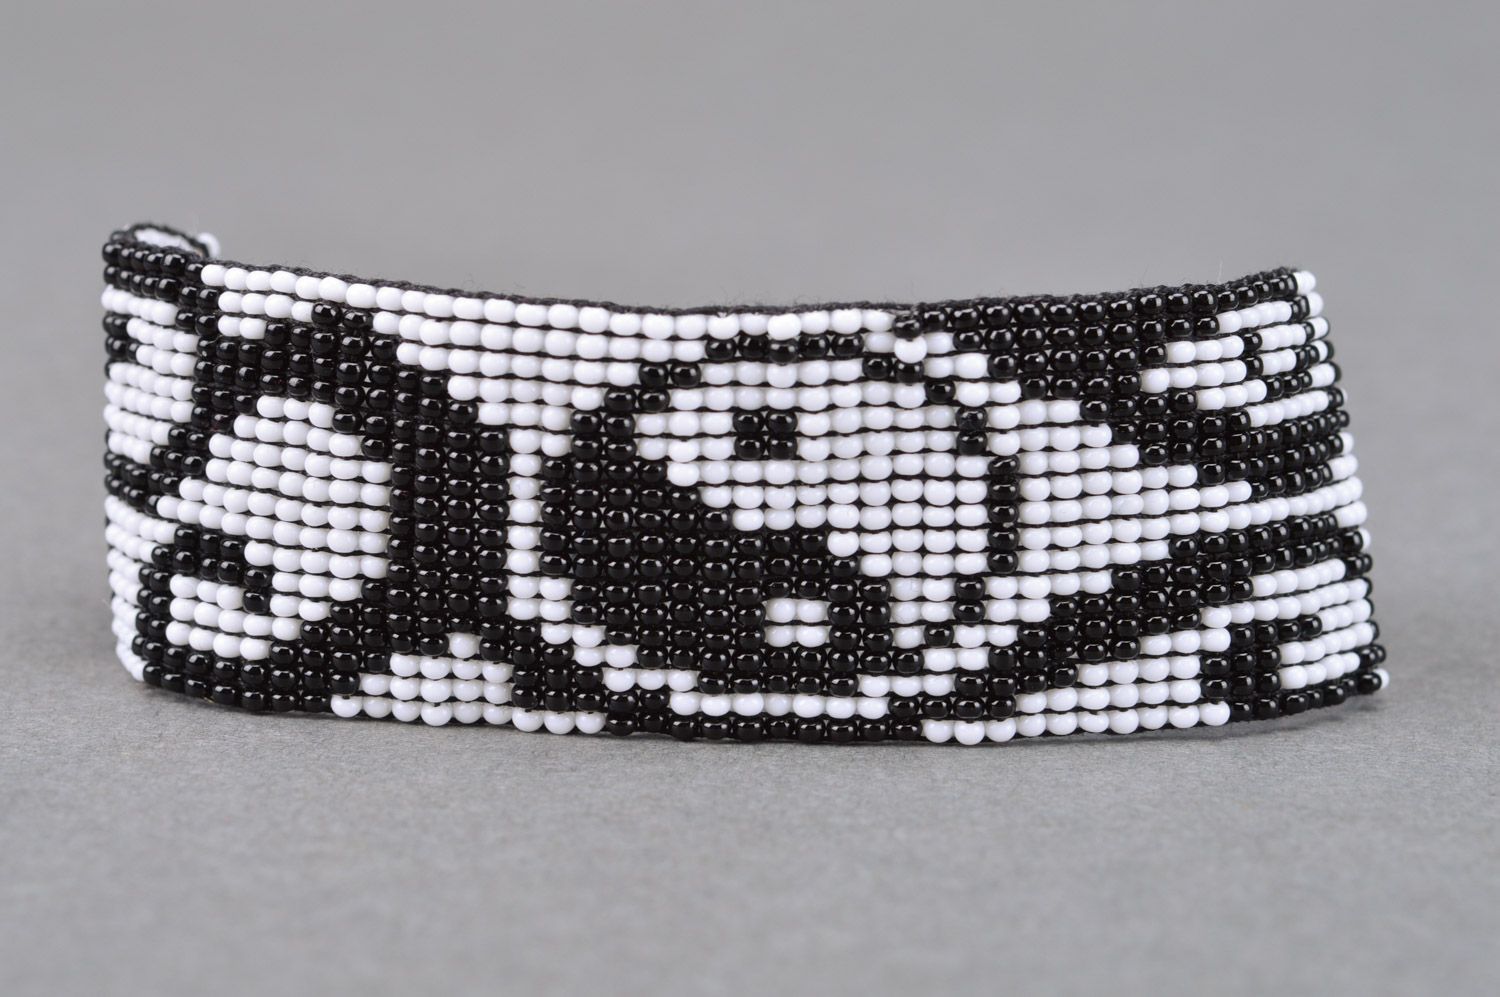 Handmade beaded wide bracelet with ties and black and white pattern photo 2